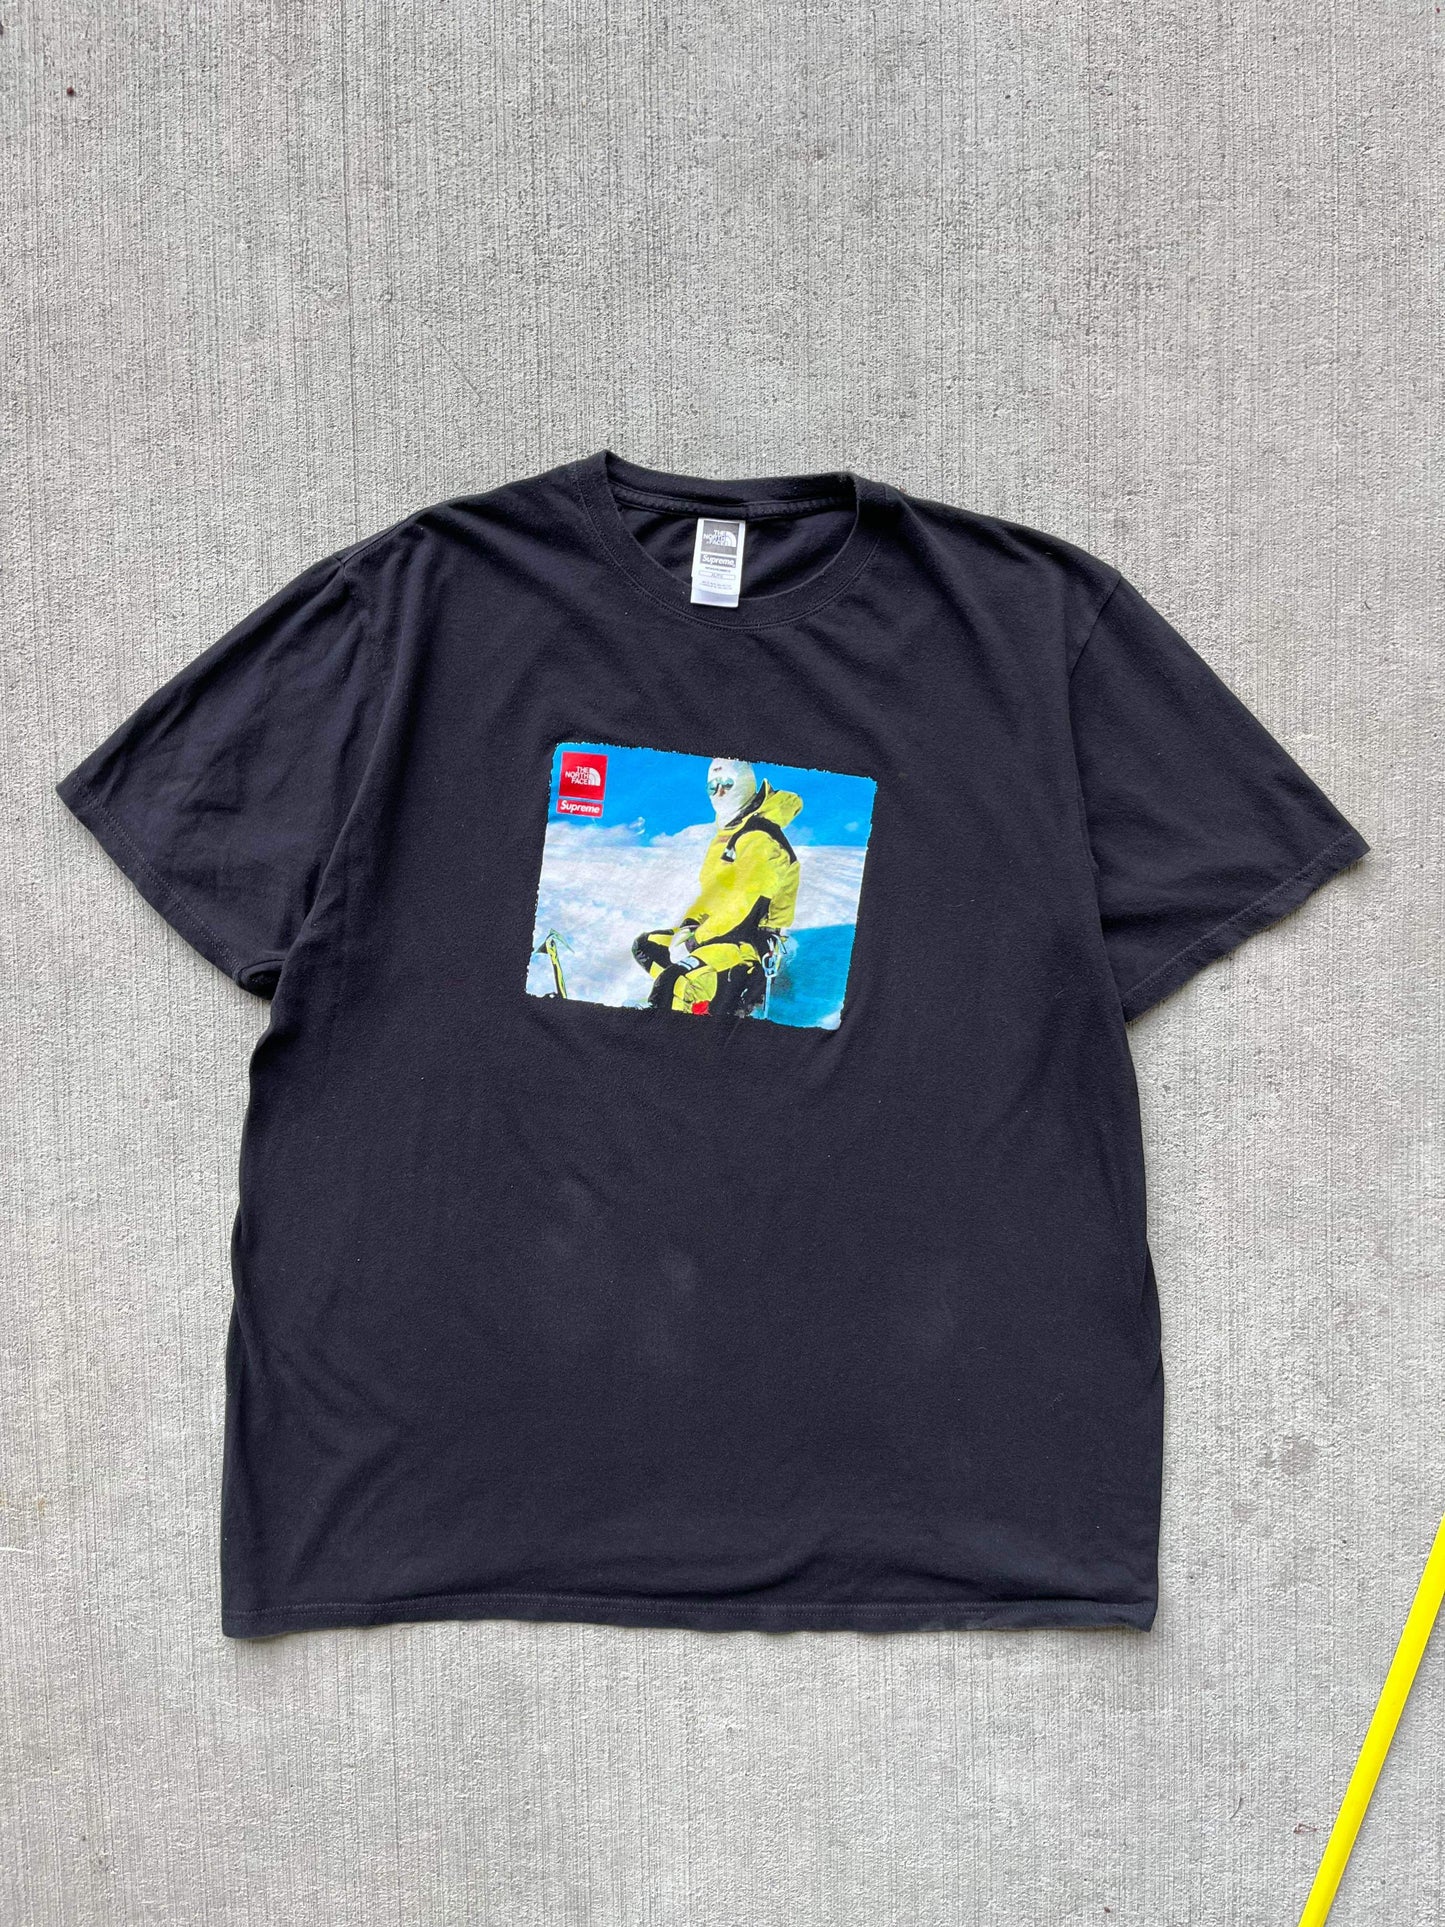 (XL/2X) Supreme x The North Face Tee